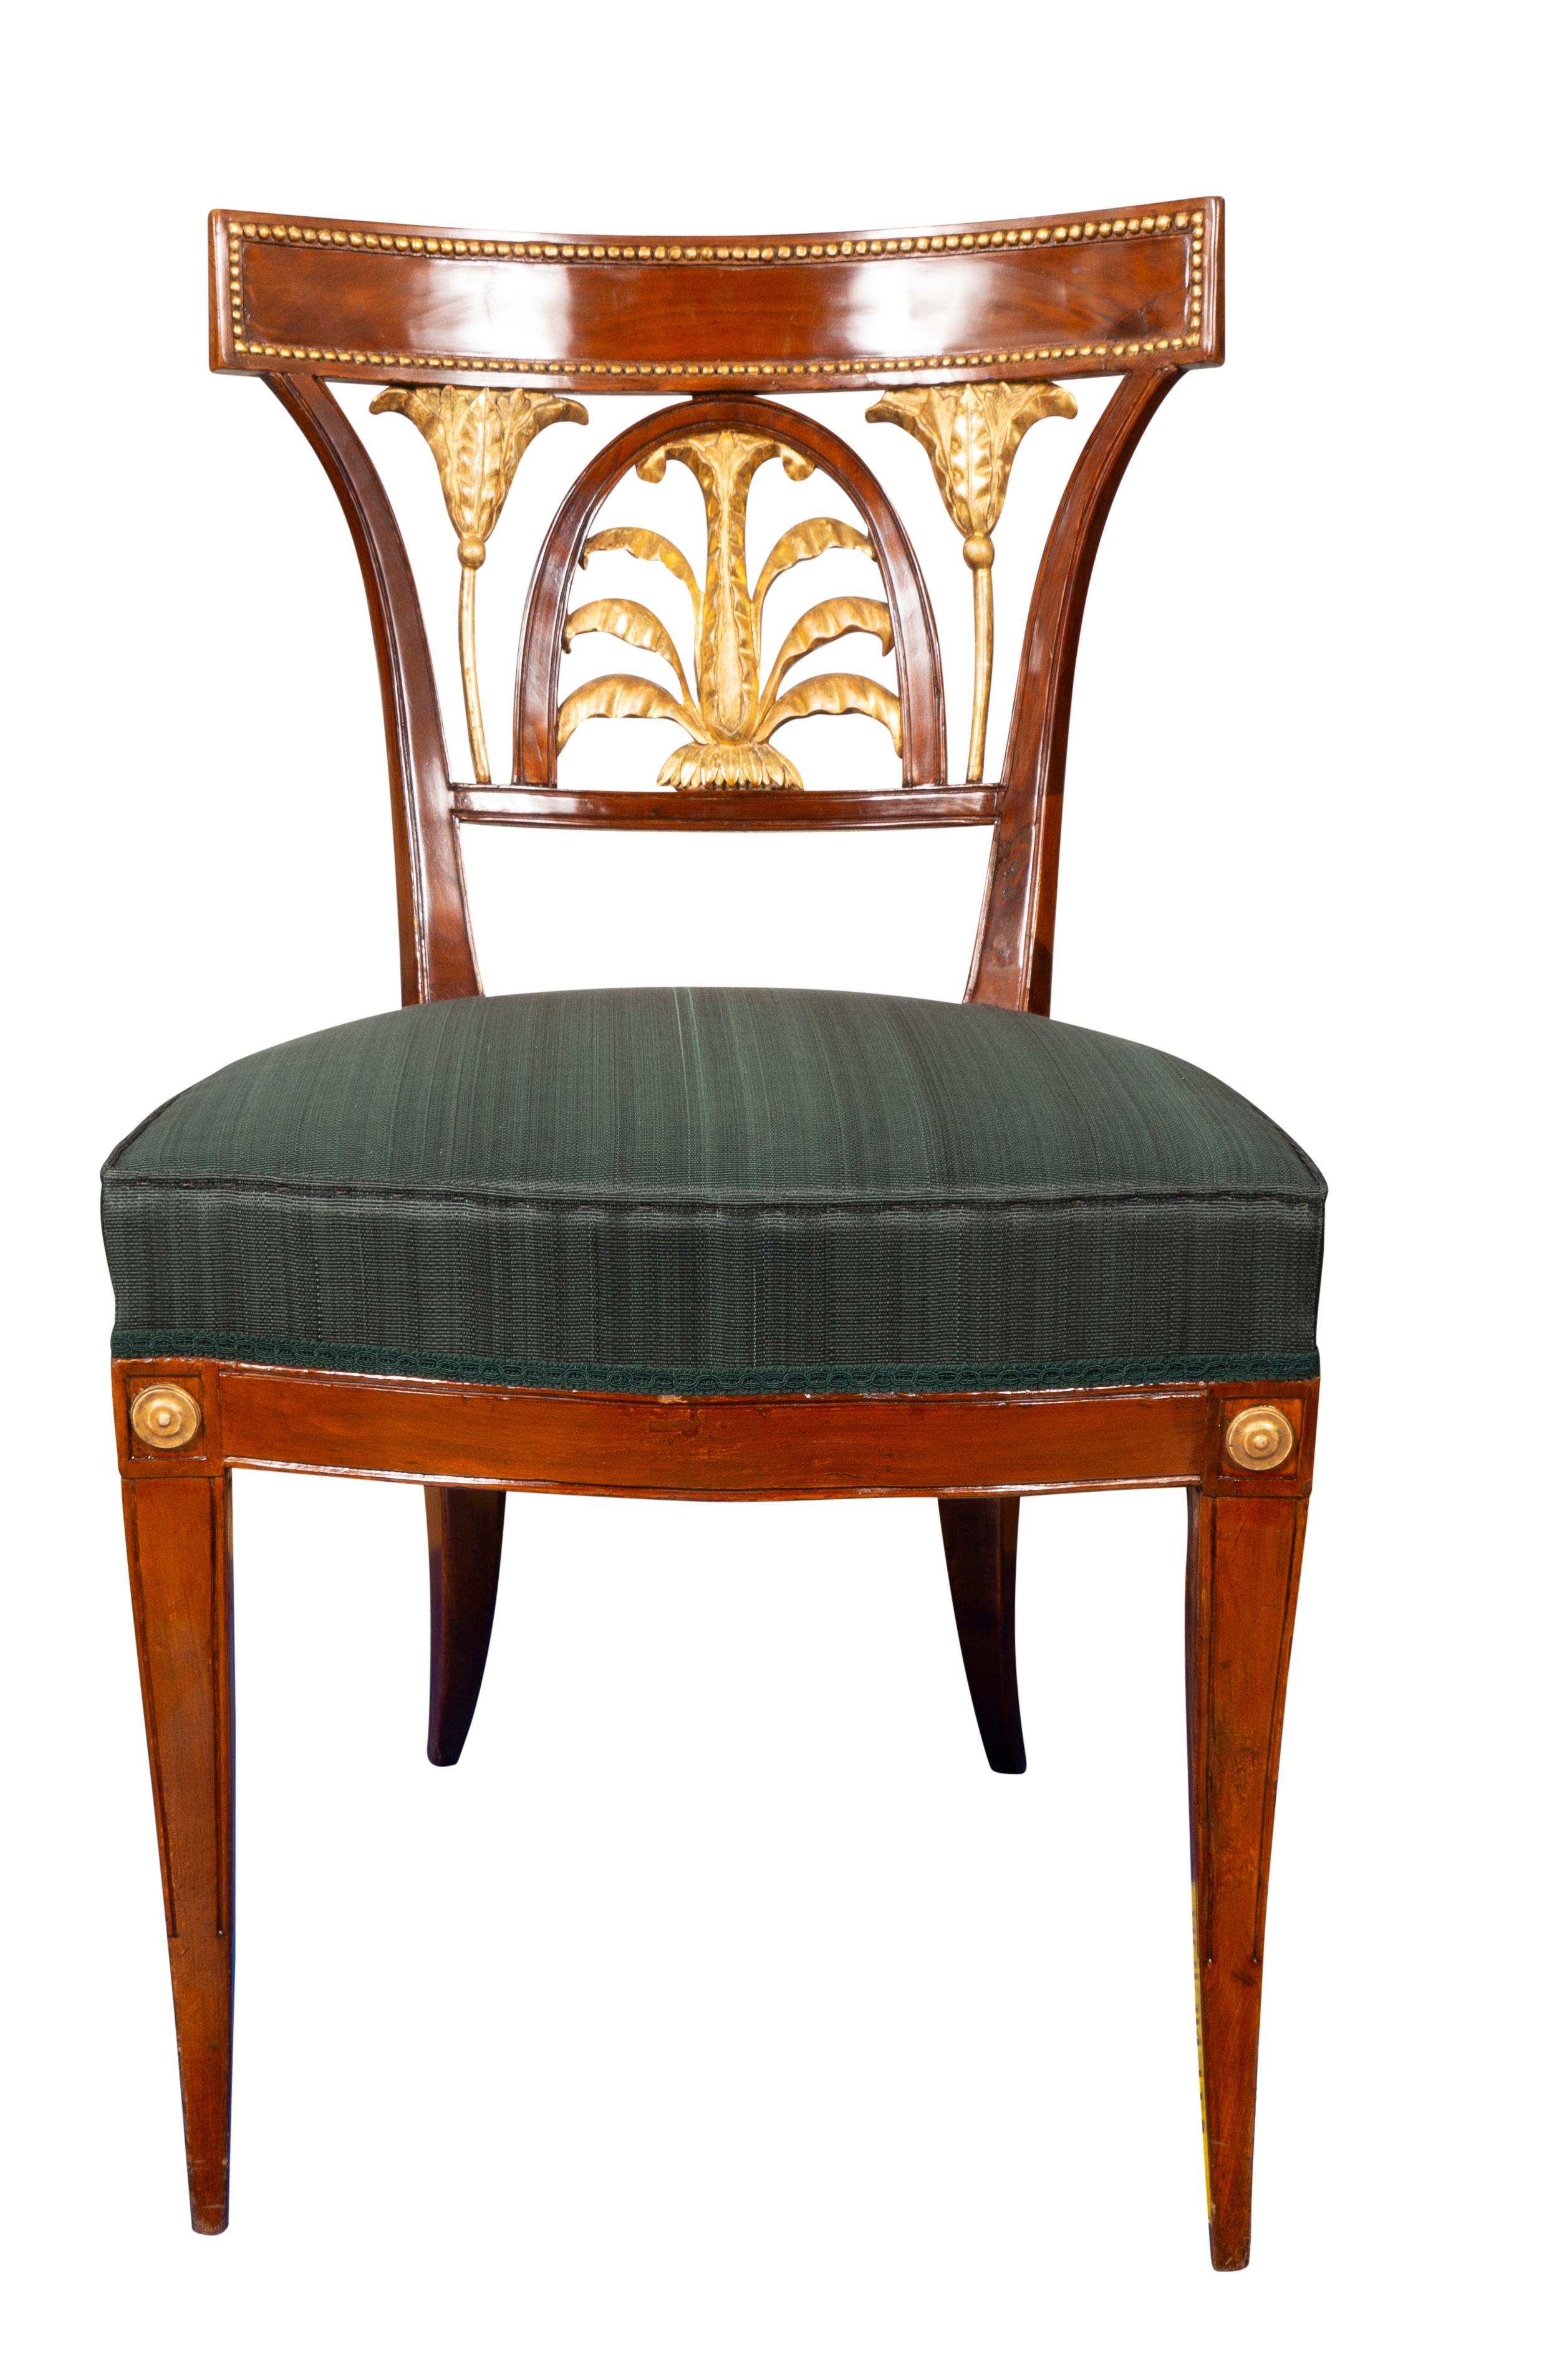 Each with rectangular crest rail with gilt beaded border over a carved and beautifully water gilded anthemion shaped splat flanked by stems and leaves. Upholstered seat raised on slightly curved square tapered legs headed by gilt roundels. From a